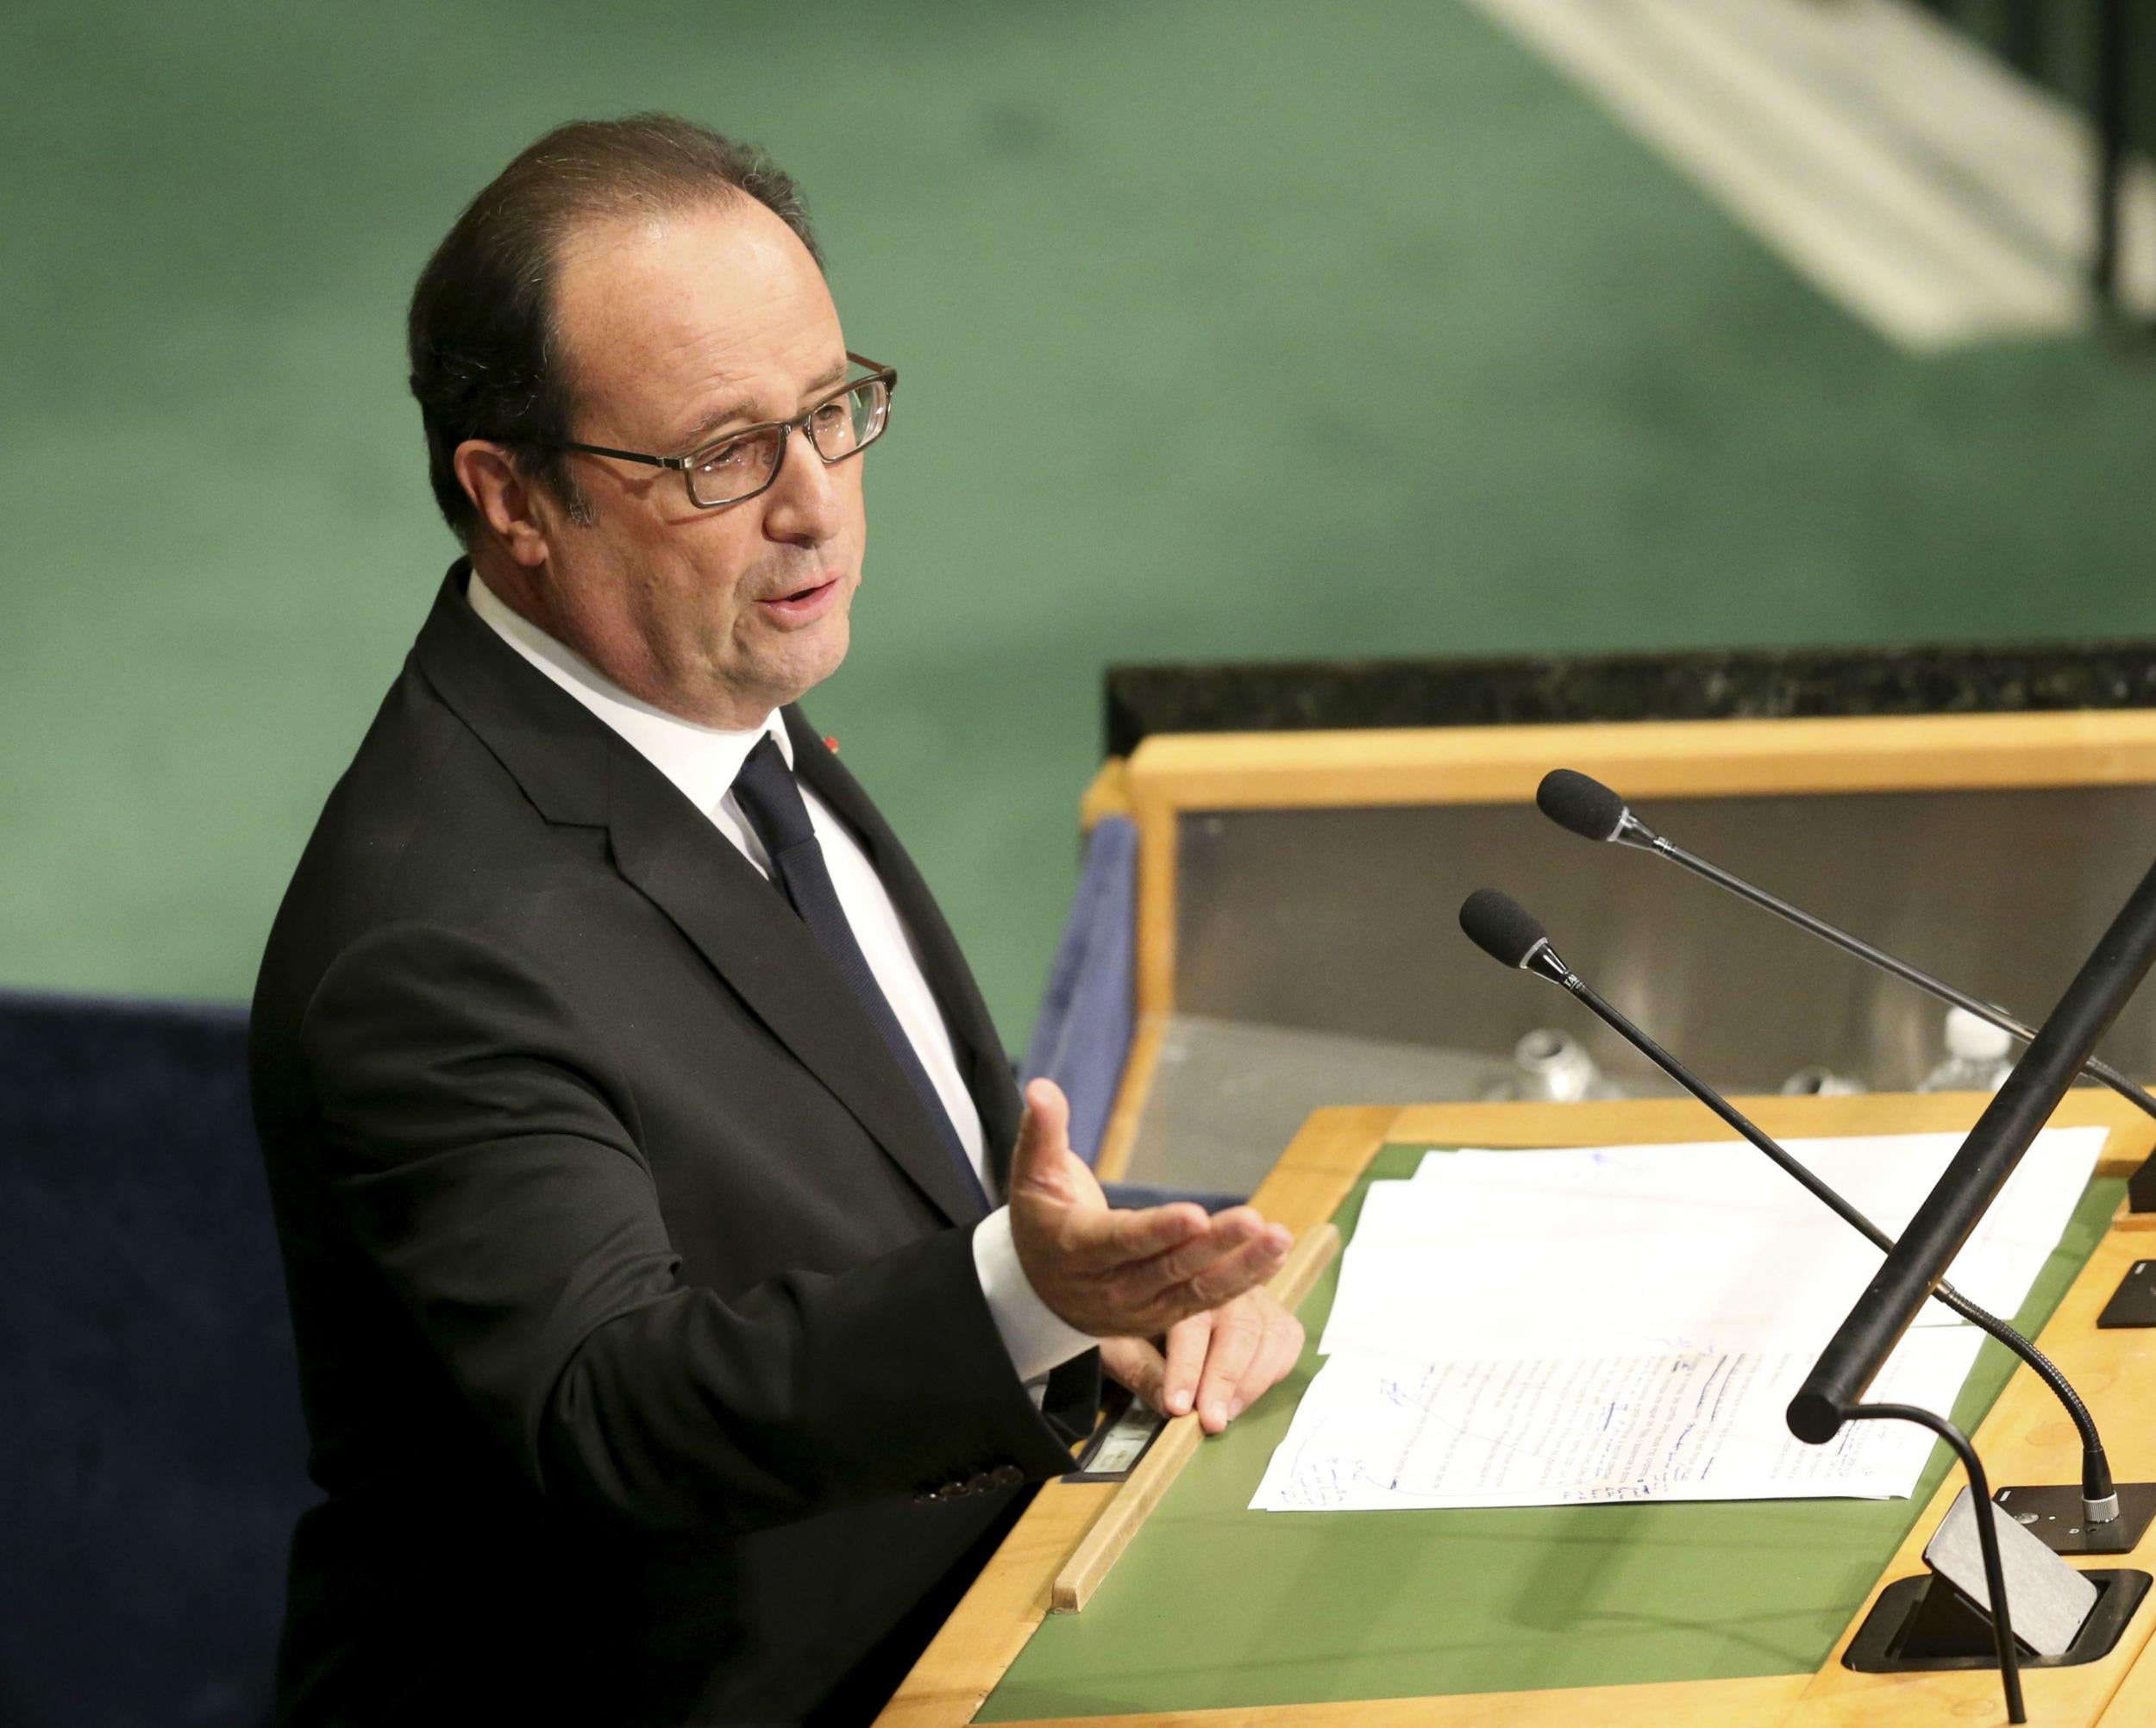 Mr Hollande said the world could no longer wait to act